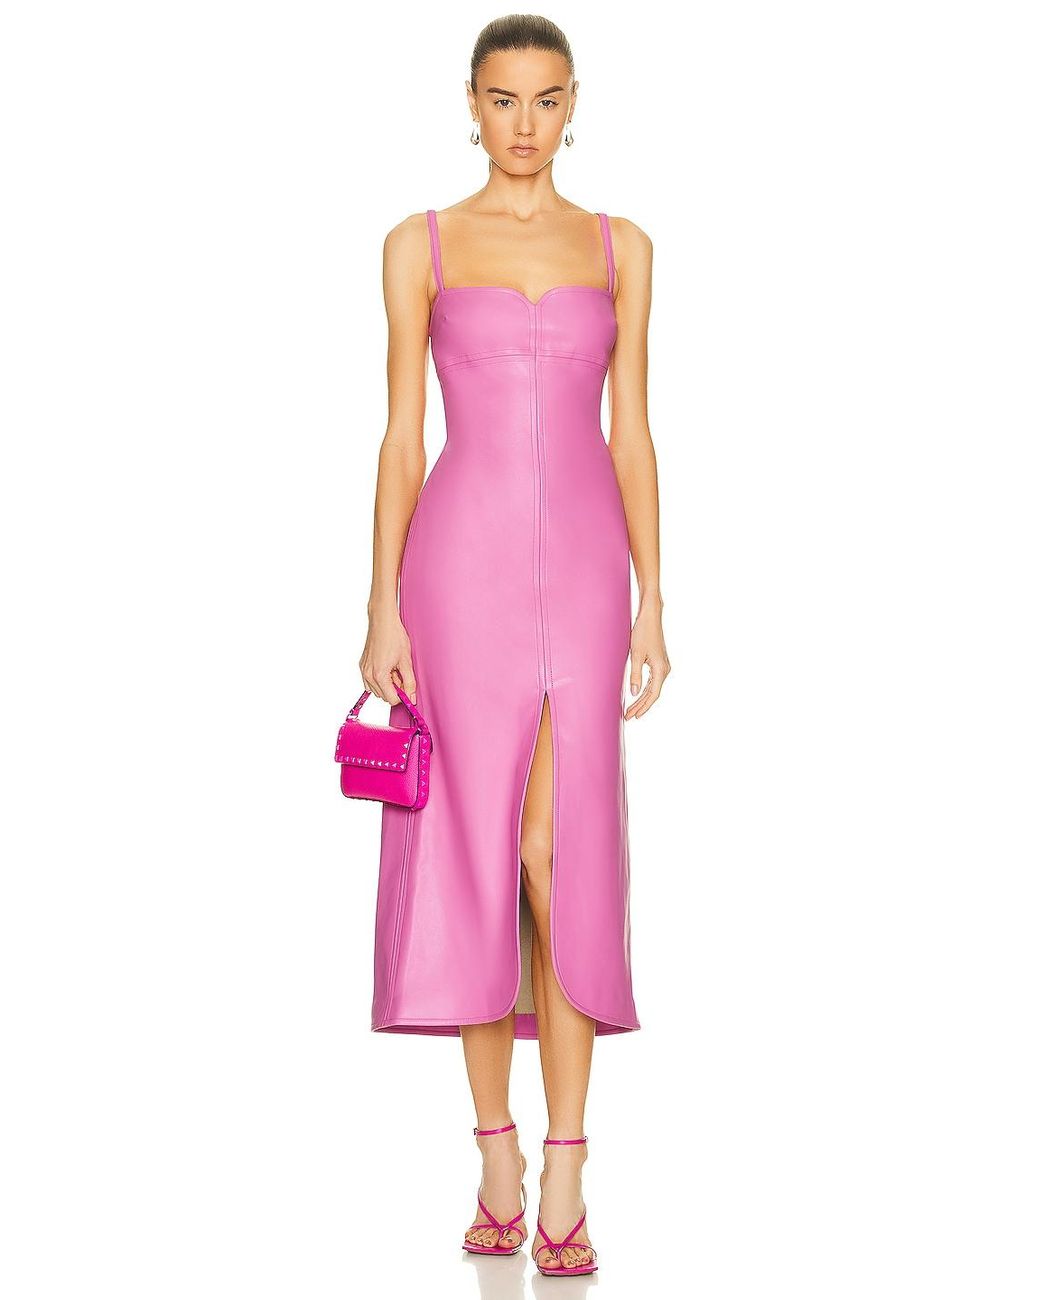 Alexis Camellia Faux Leather Dress in Pink | Lyst